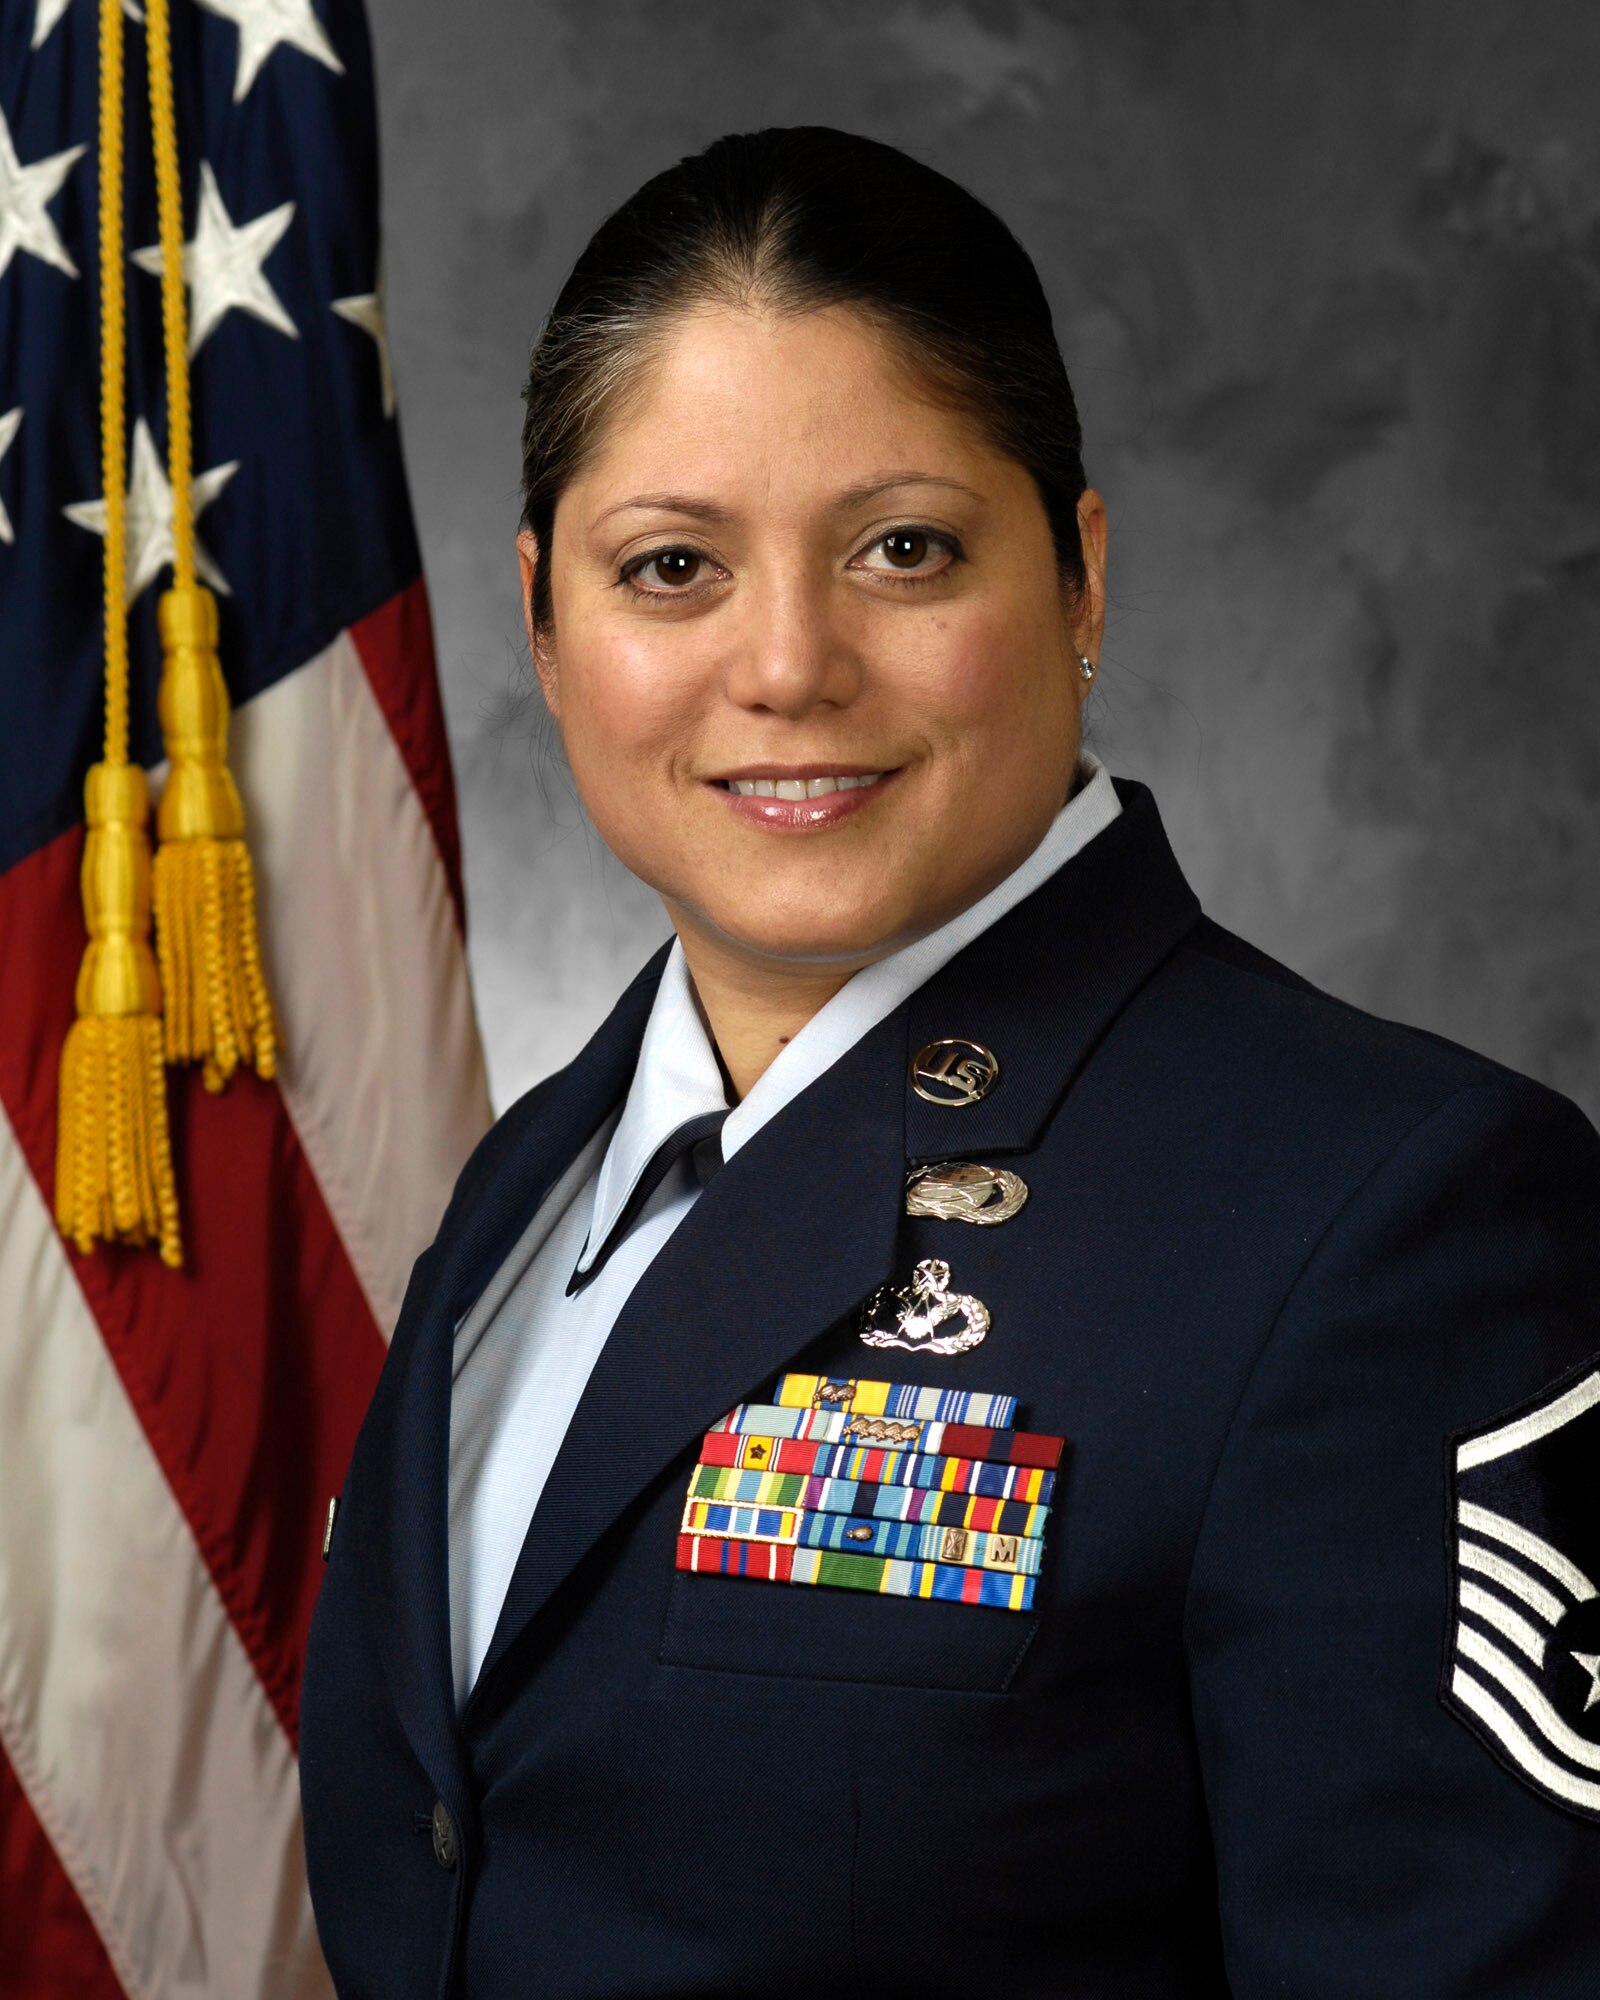 Master Sgt. Yolanda Knapp is the 11th Civil Engineers Squadron unit training manager and the 11th Wing’s Military Volunteer of the Year. “Phenomenal service and commitment,” Lieutenant Colonel Thomas Carroll, former 11th CES commander, wrote in her nomination package. “Service before self and energetic ability to meet mission goals and community involvement established a benchmark performance that’s leadership at its best. Her 496 hours of dedication to others encompasses leading Wing-wide functions and squadron initiatives, as well as spearheading local community projects and getting others involved.” Sergeant Knapp’s community involvement included being the lead member for the Wing’s holiday party, Squadron Booster Club secretary, organizing a squadron picnic for deployed returnees and serving as security NCOIC at the Joint Services Open House at Andrews AFB, Md. (U.S. Air Force photo by Senior Airman Sean Adams)